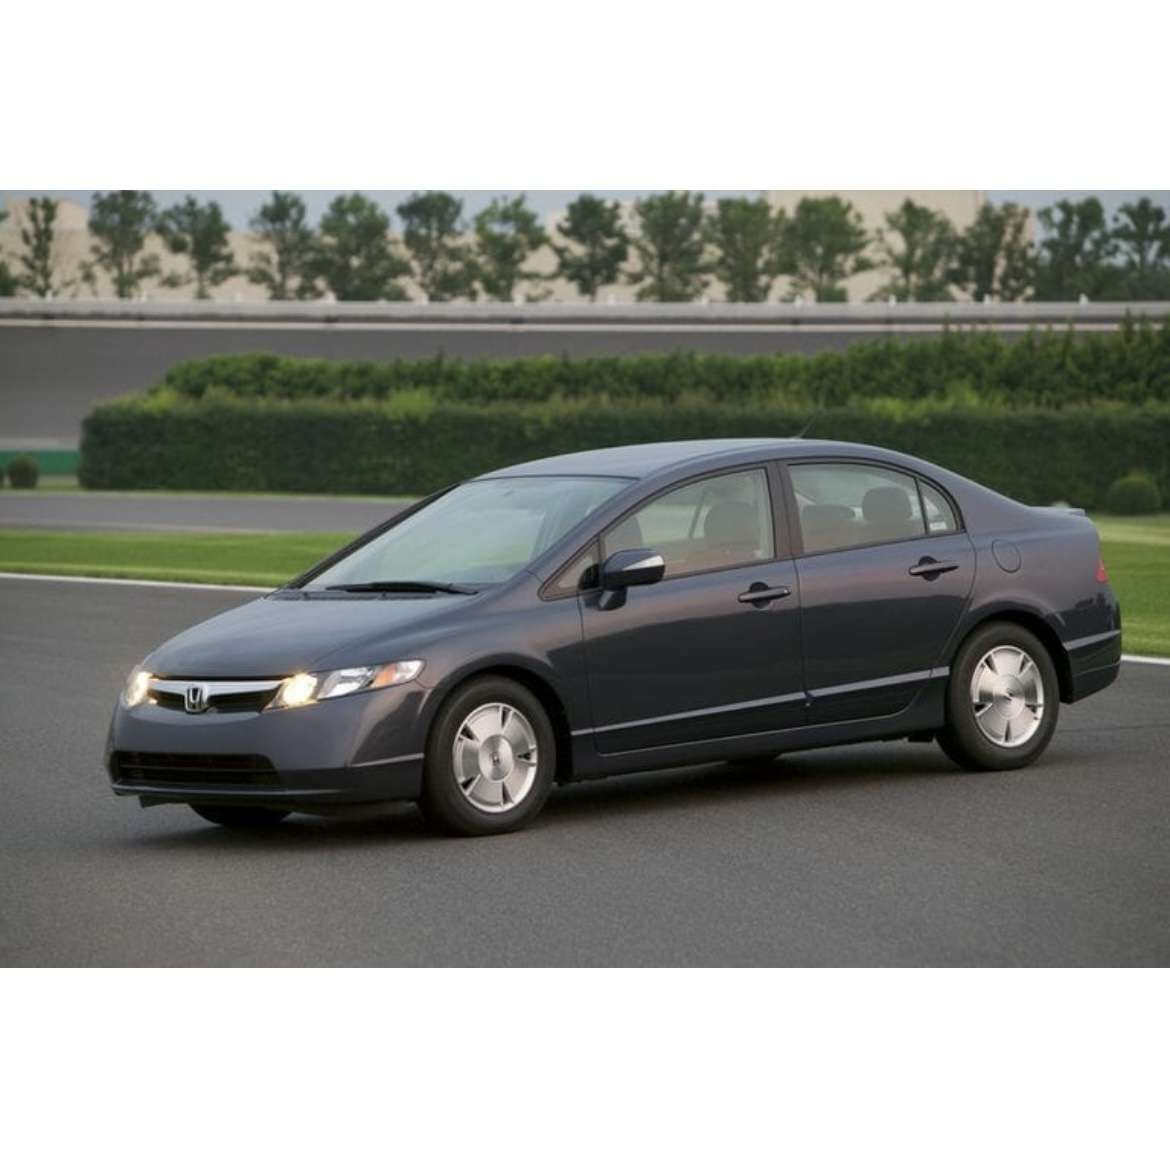 Honda civic 2007 puzzle online from photo